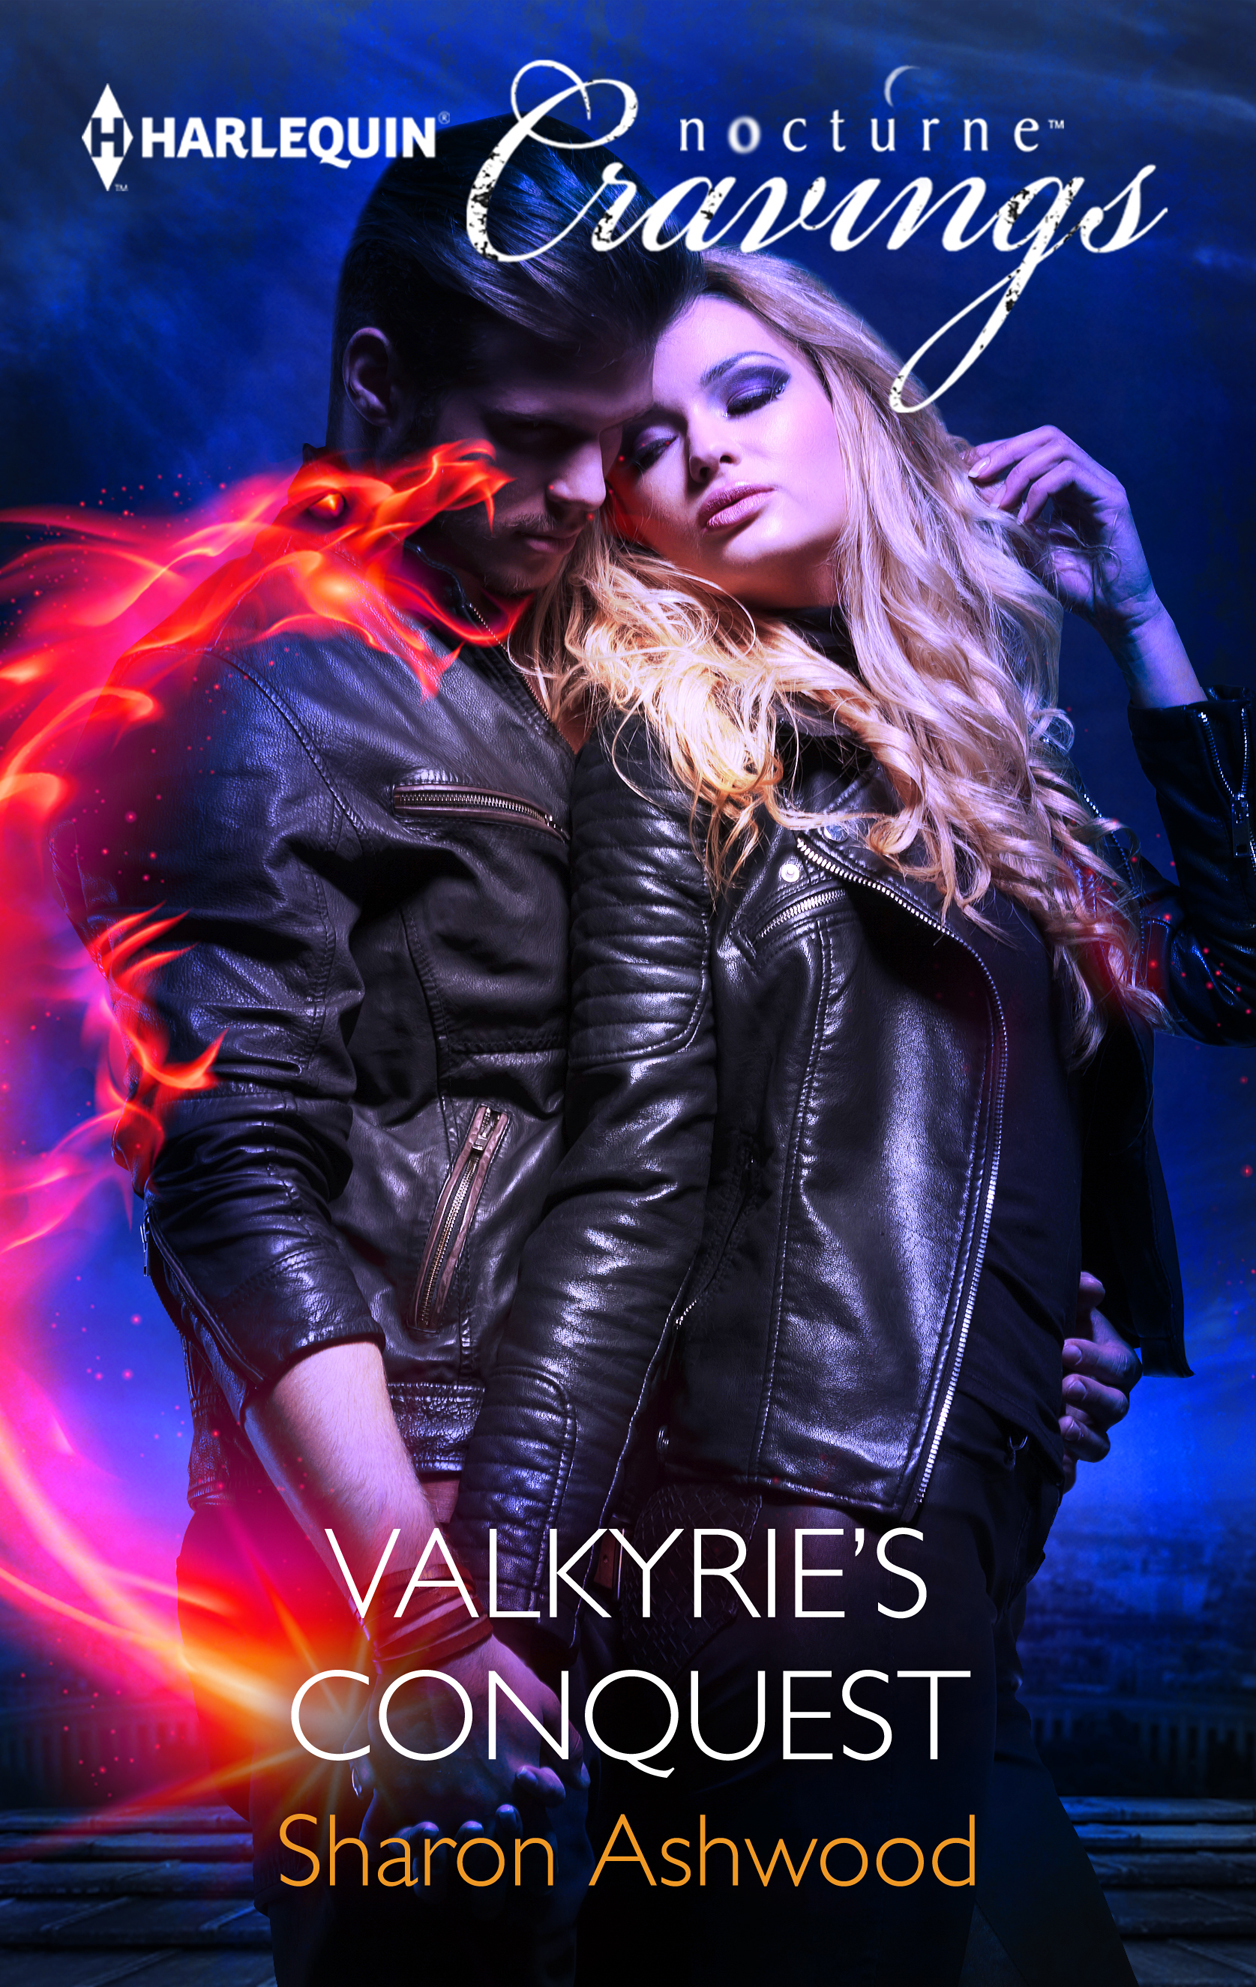 Valkyrie's Conquest (2014) by Sharon Ashwood